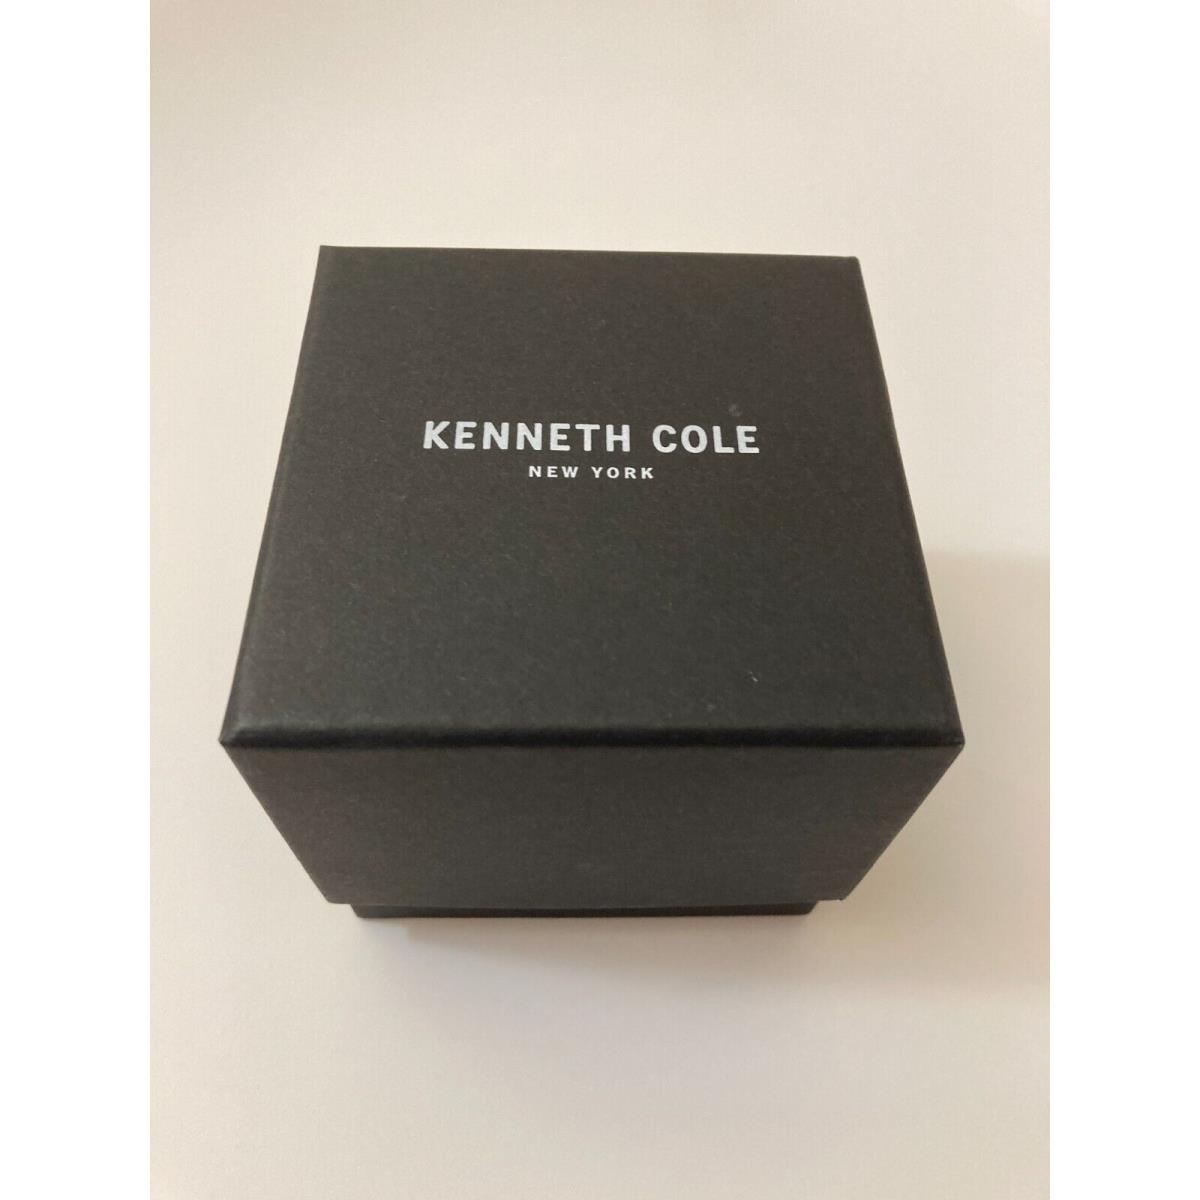 Kenneth Cole watch New York - Blue Band